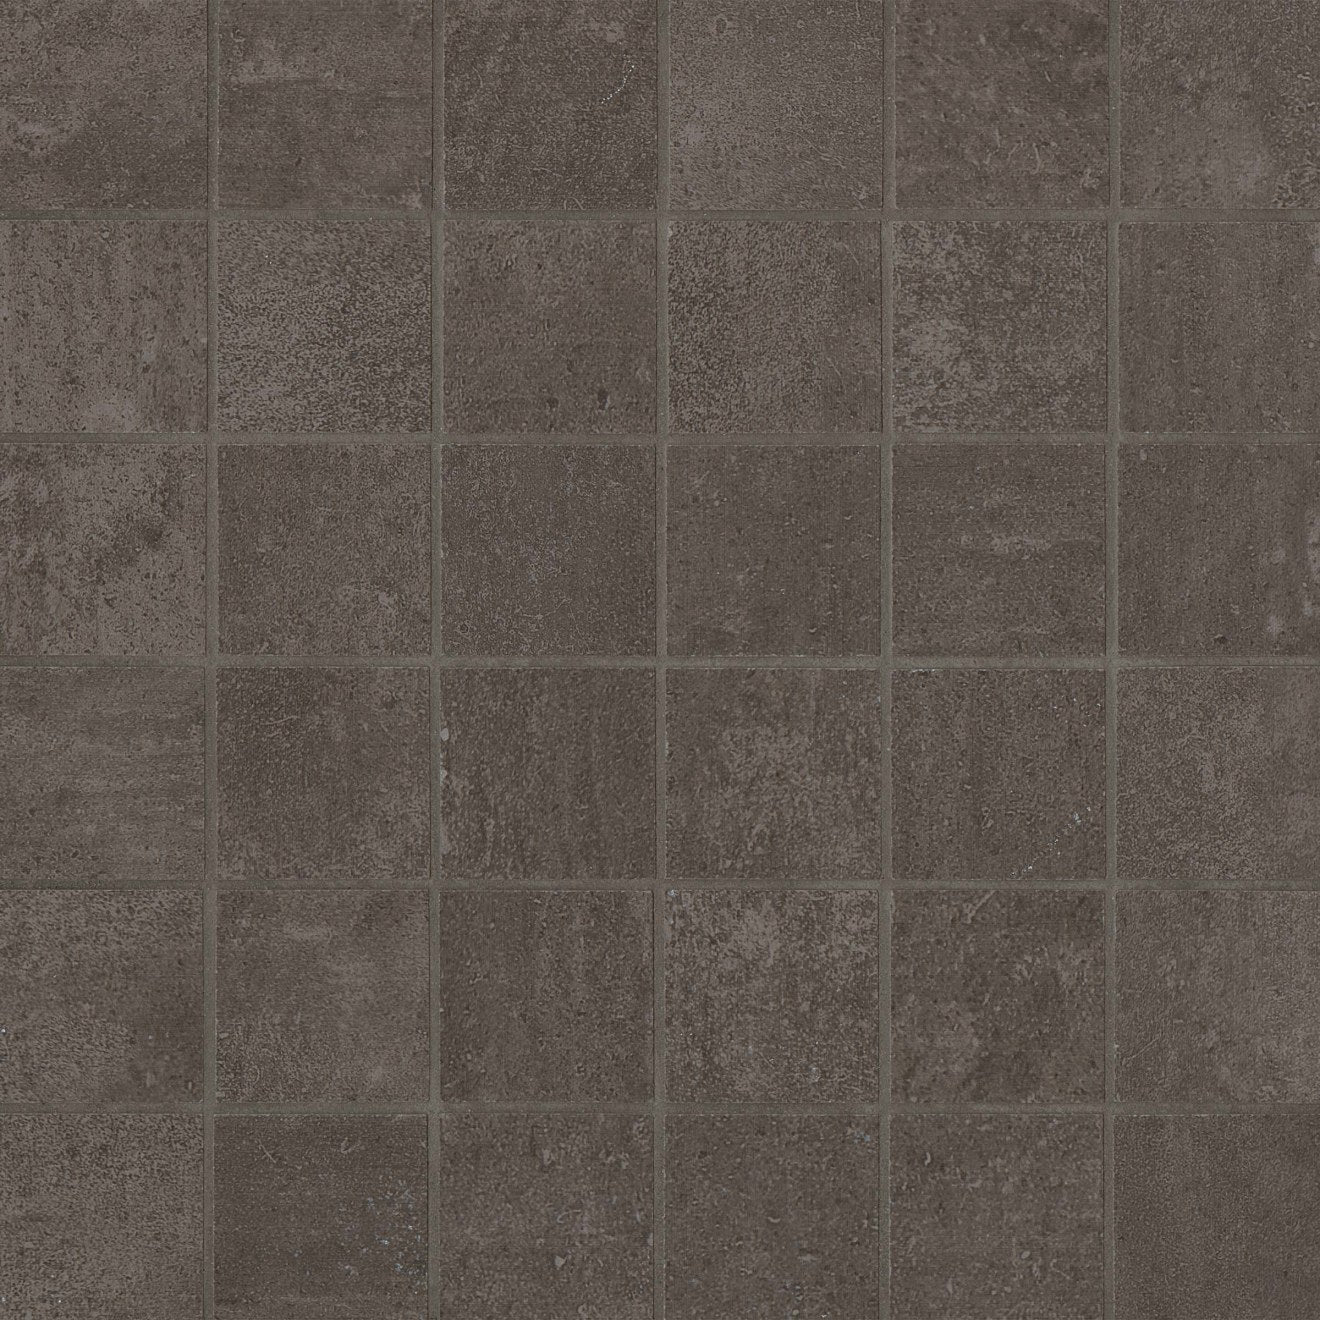 Bedrosians - Simply Modern - 2" x 2" Color body Porcelain Mosaic - Coffee